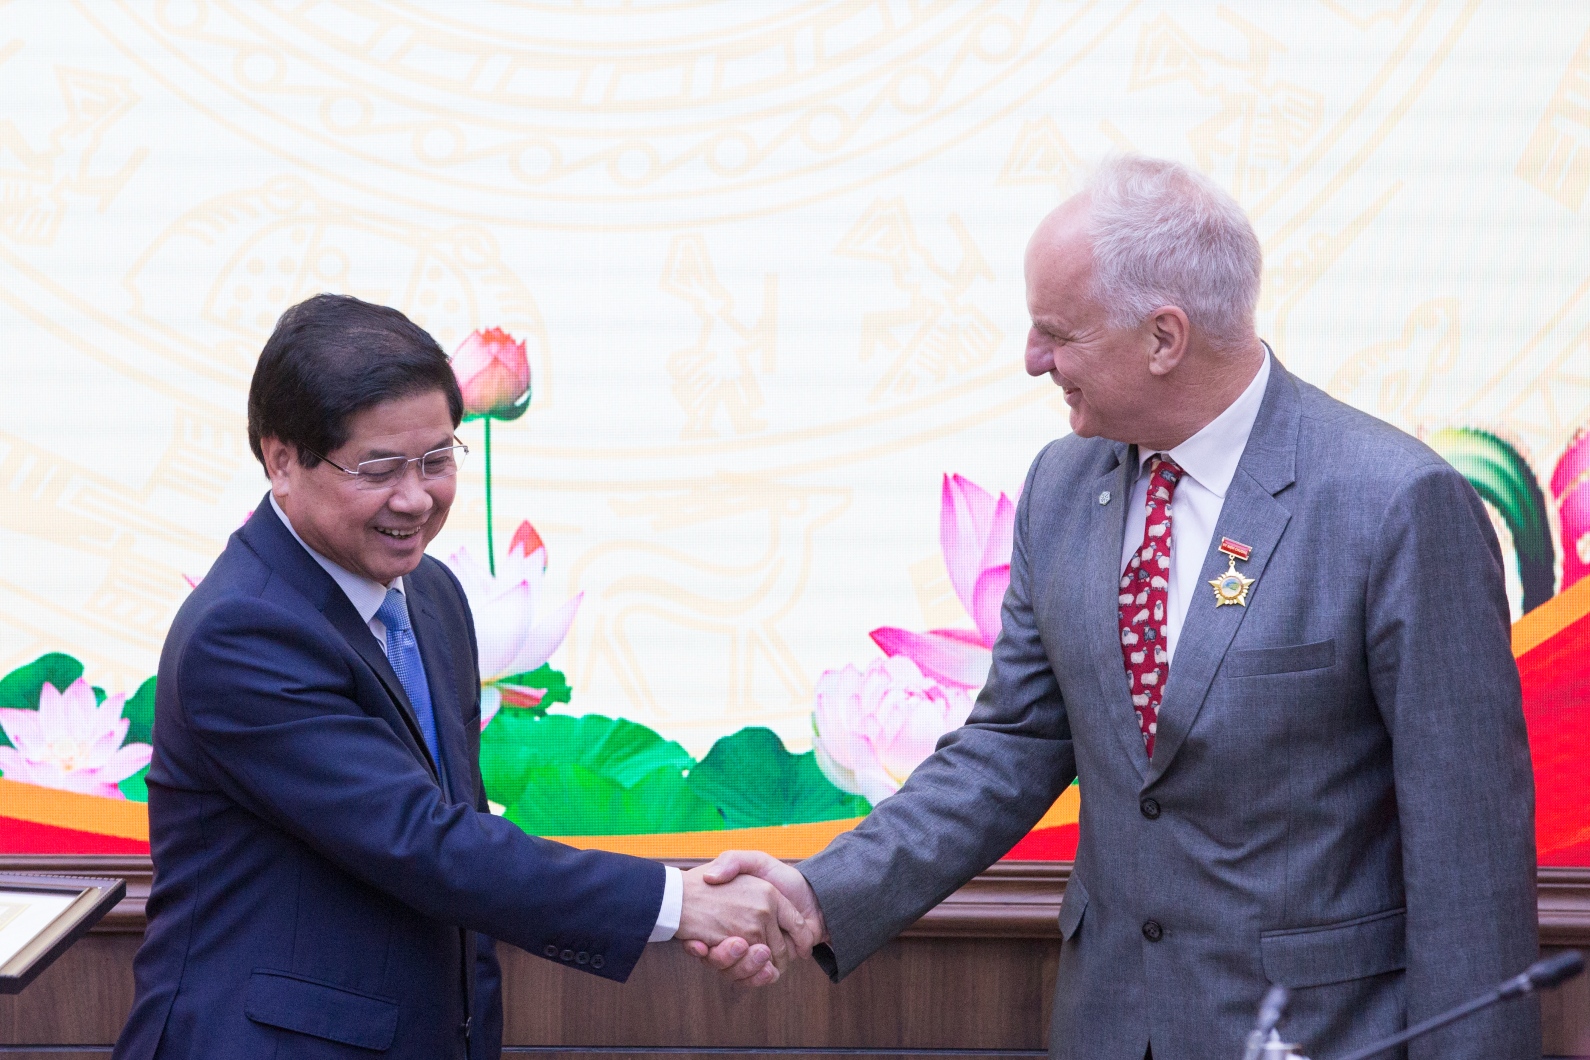 ACIAR CEO, Professor Andrew Campbell, and Vice Minister Le Quoc Doanh shaking hands and smiling.